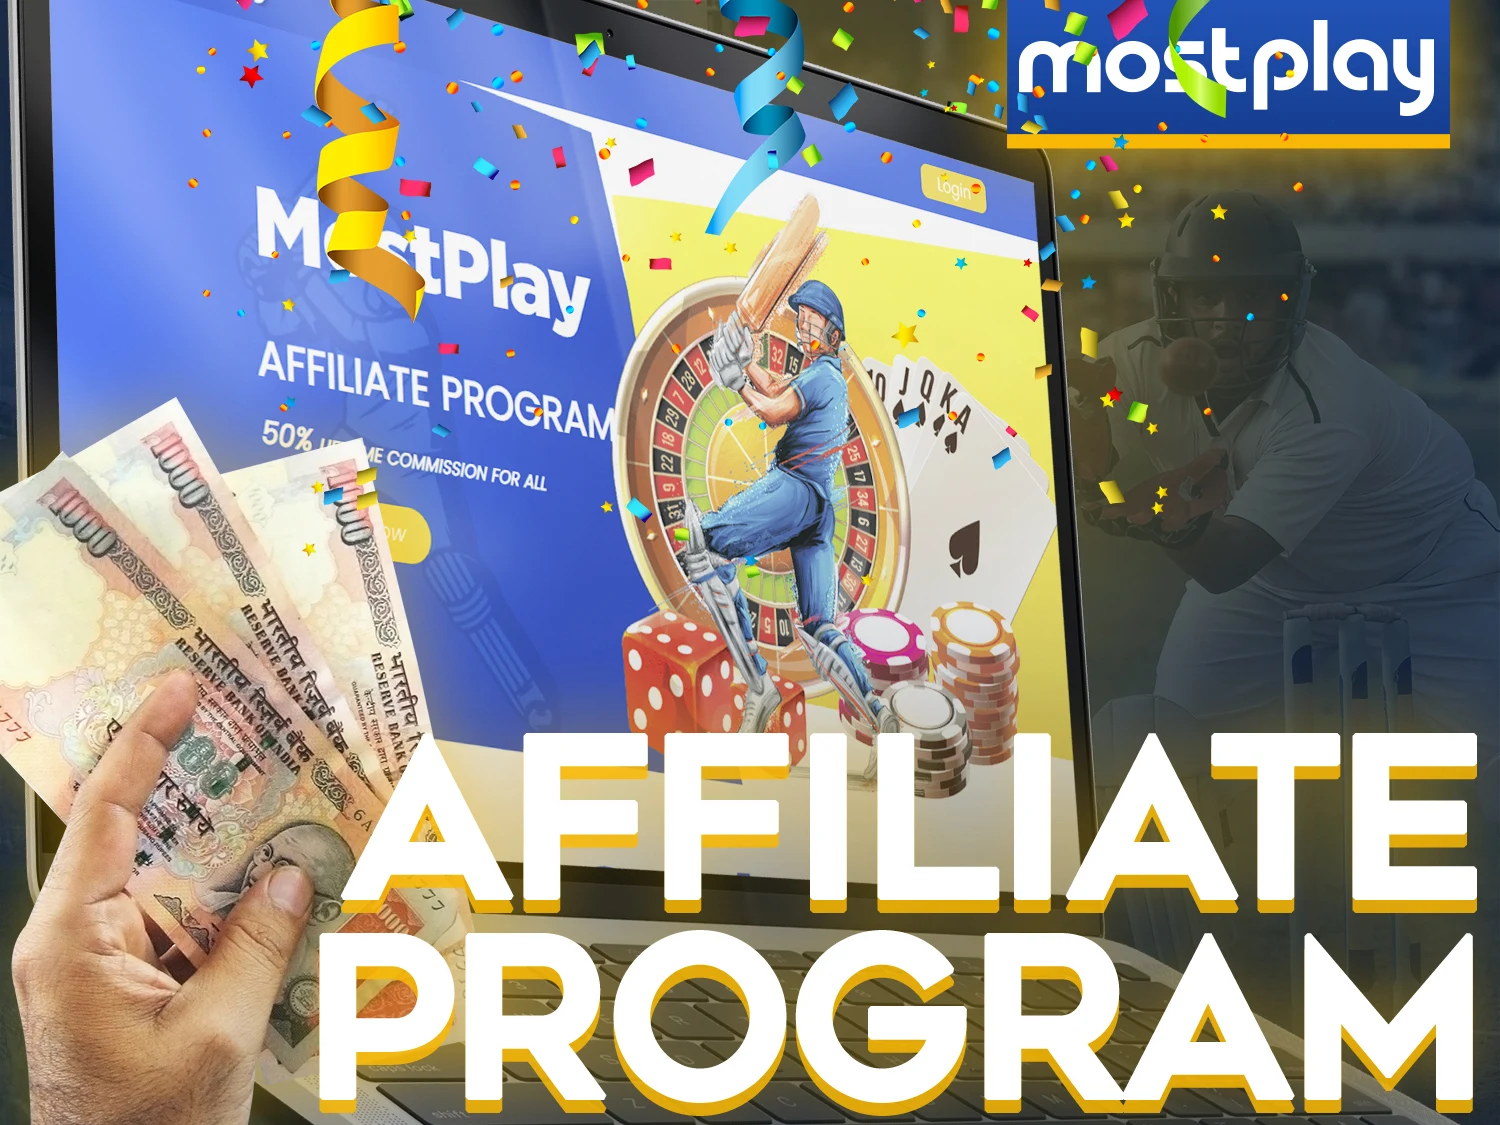 Invite your friends by using the Mostplay affiliate program.